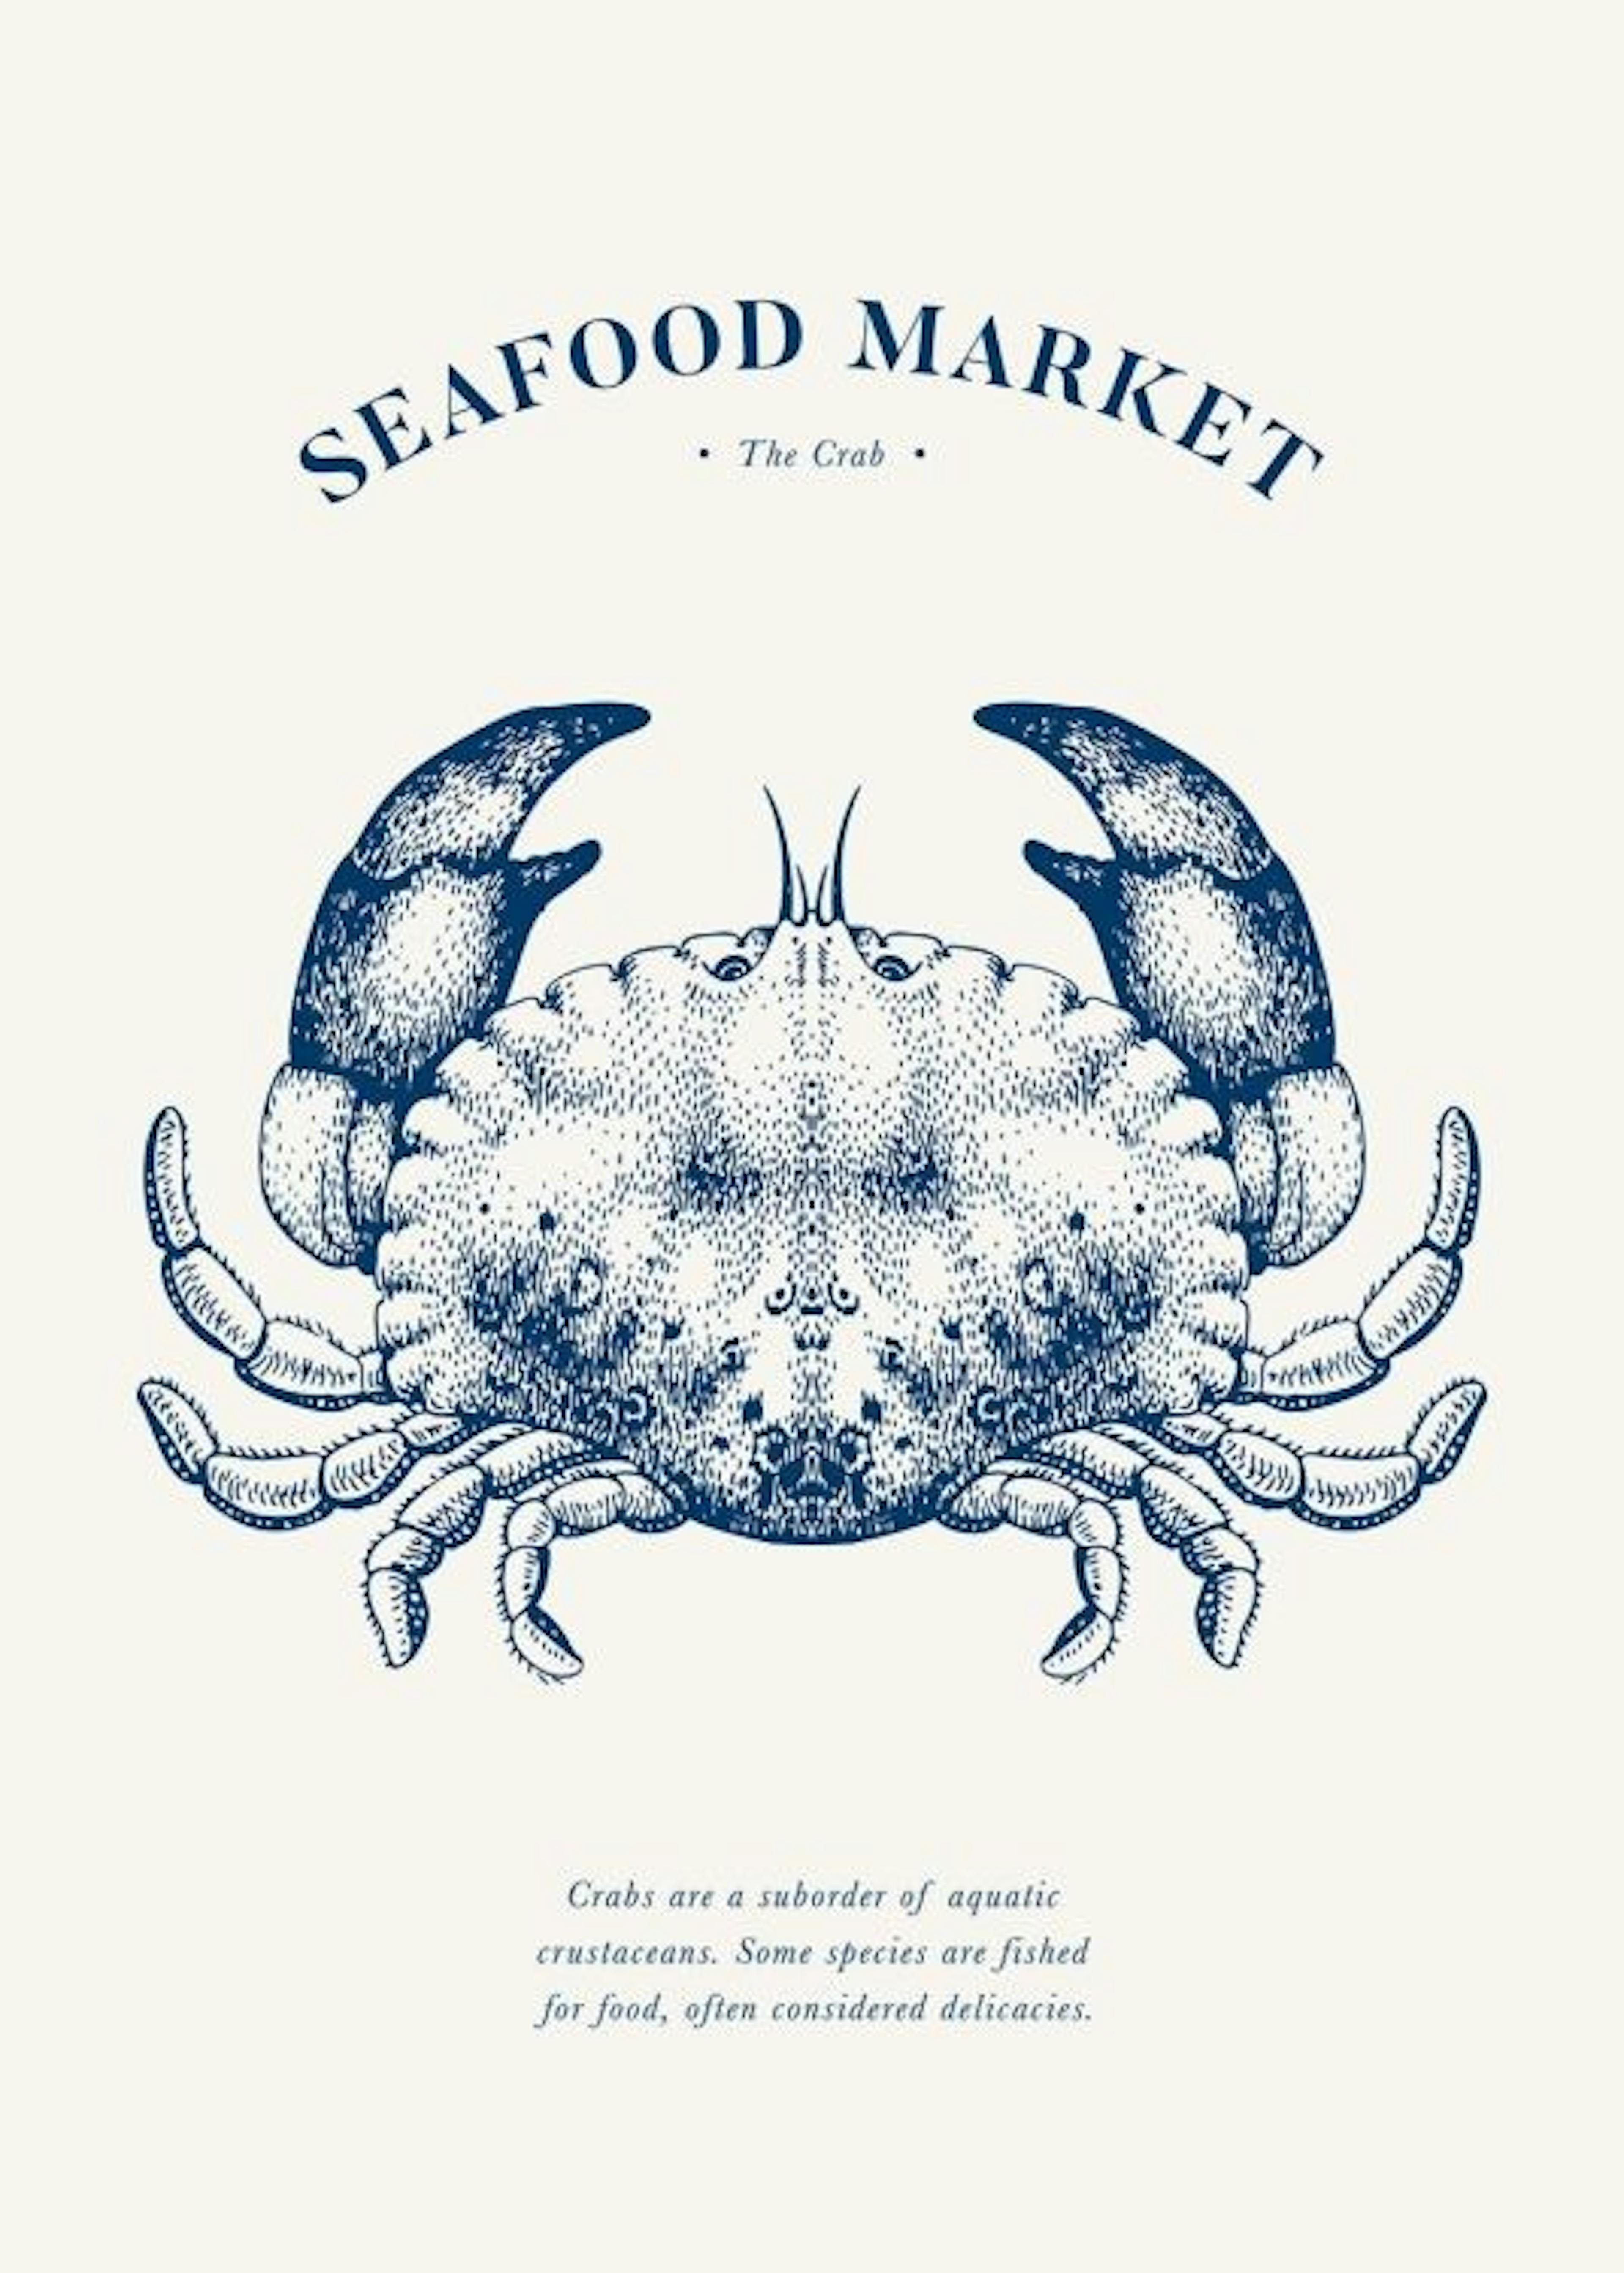 Seafood Market - The Crab Poster 0